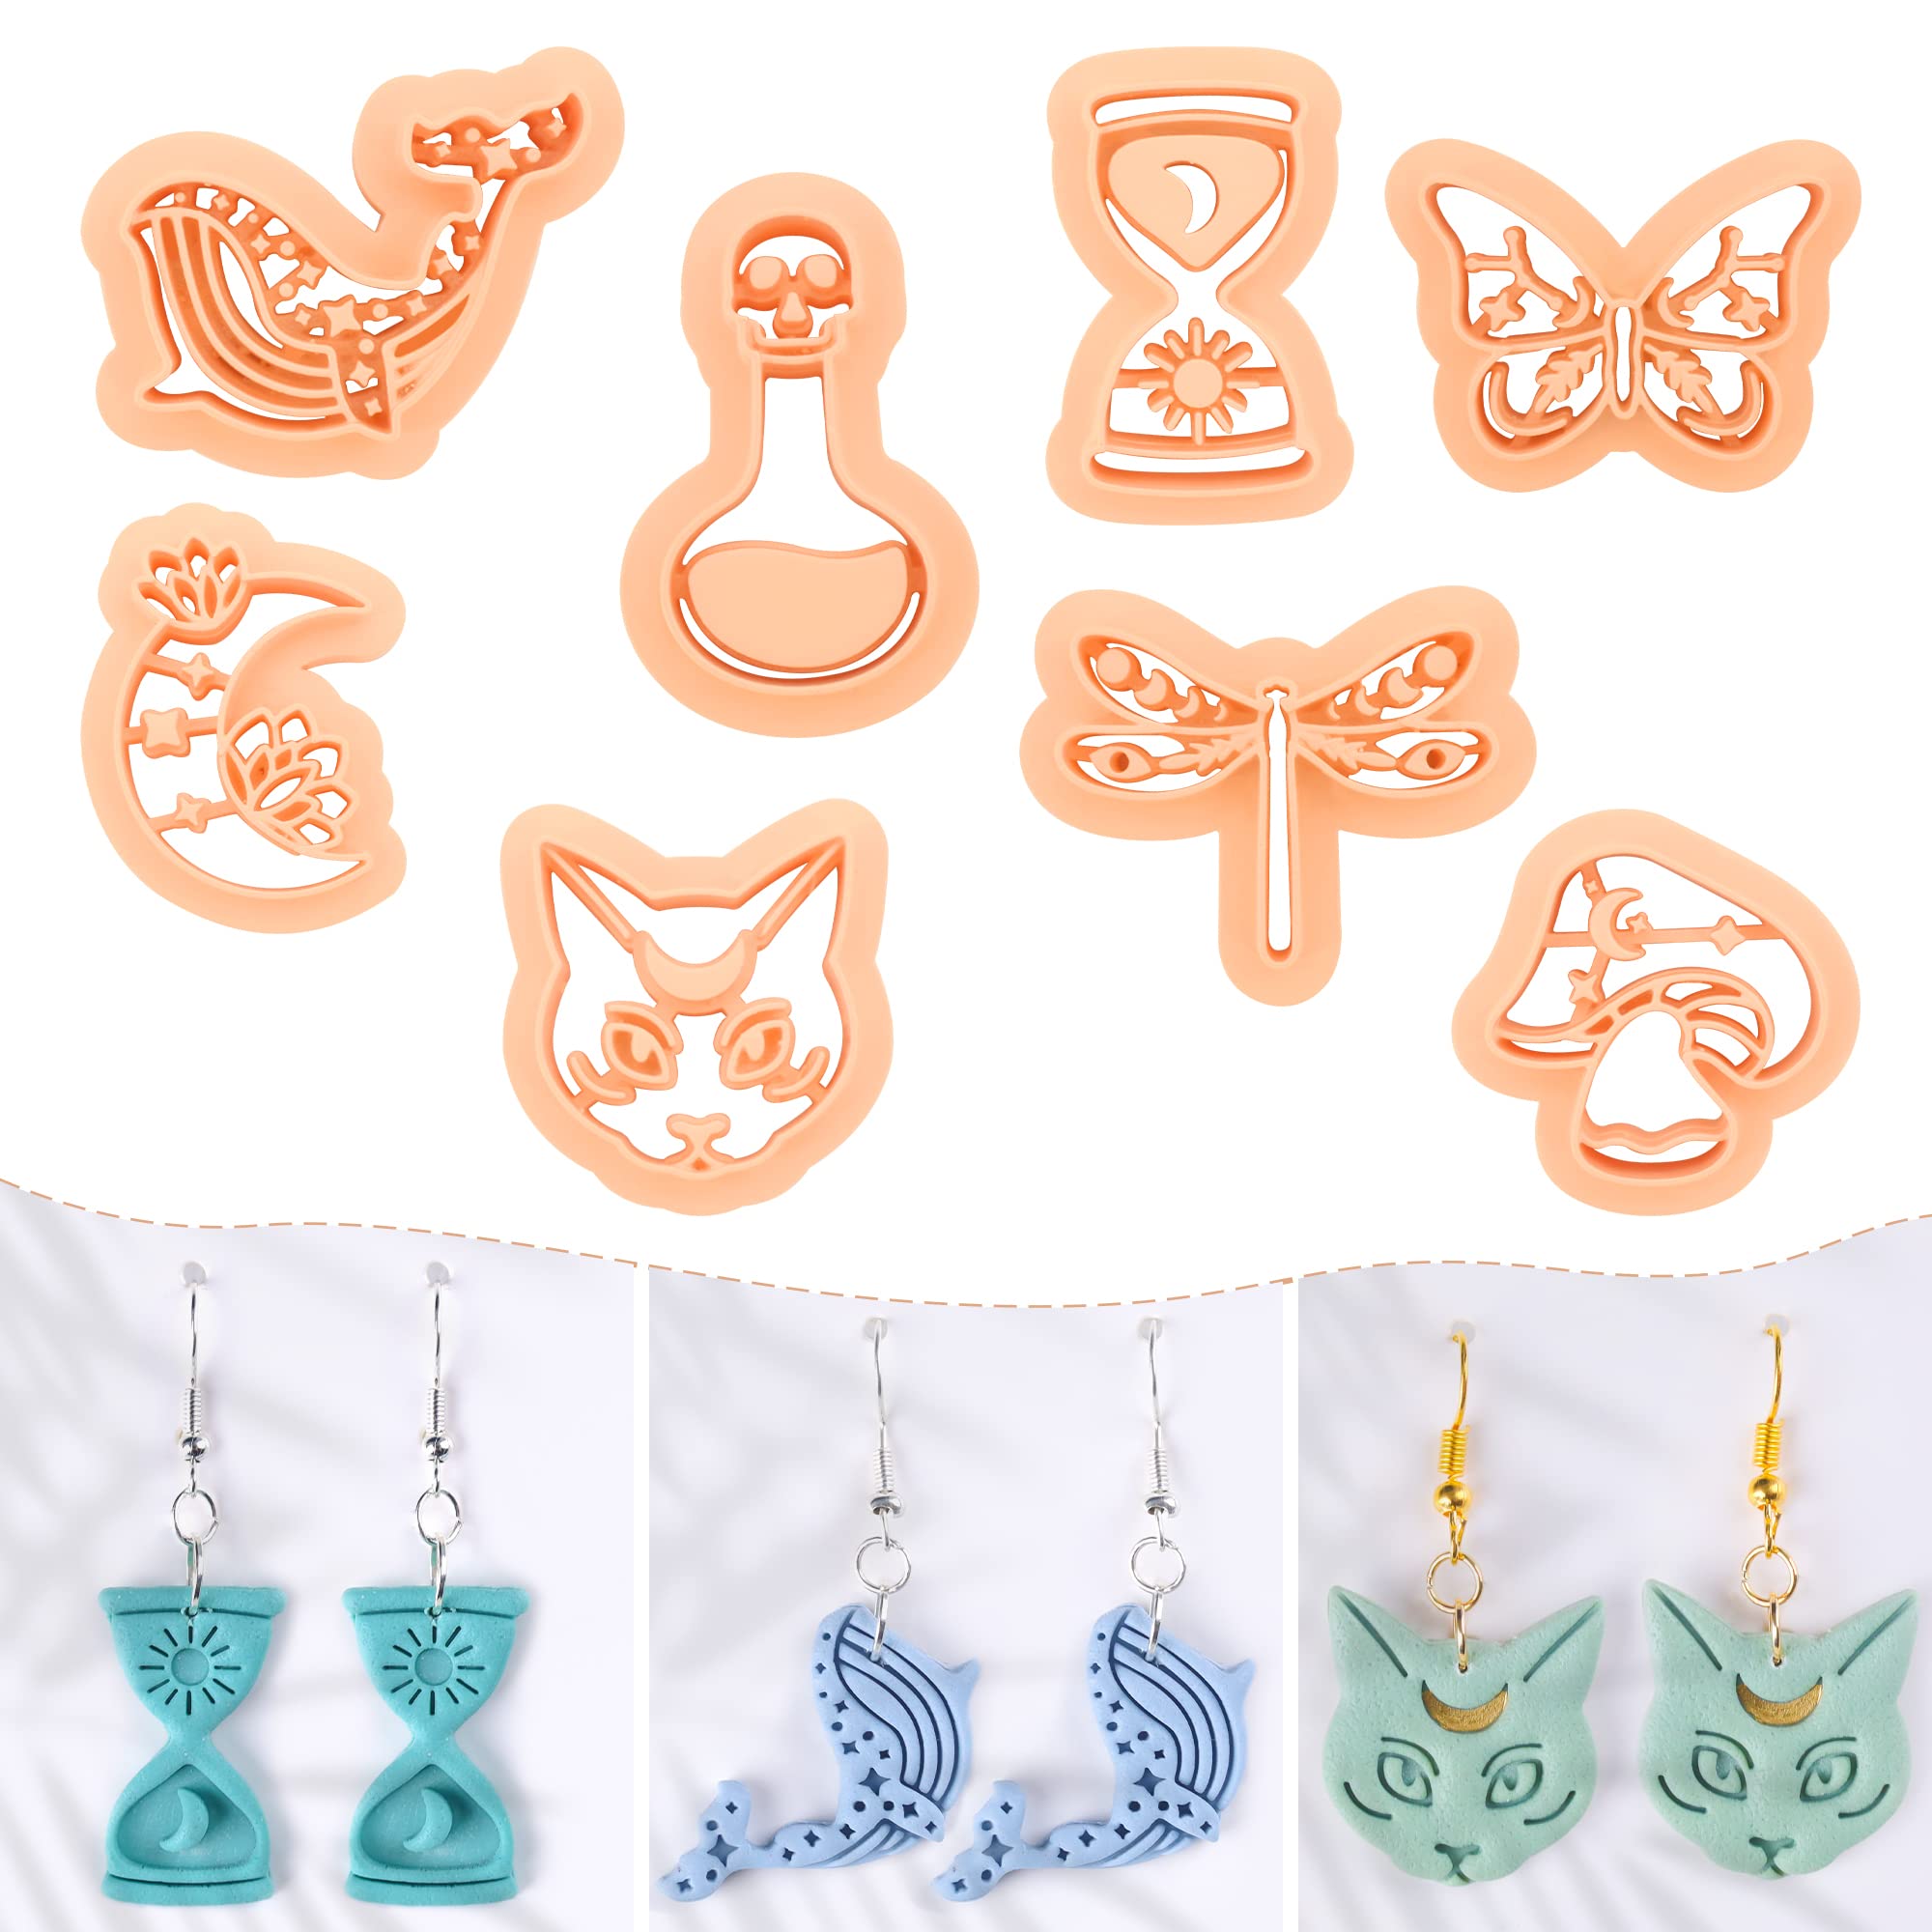 Puocaon Mystic Cats Polymer Clay Cutters 8 Pcs Boho Clay Earring Cutte